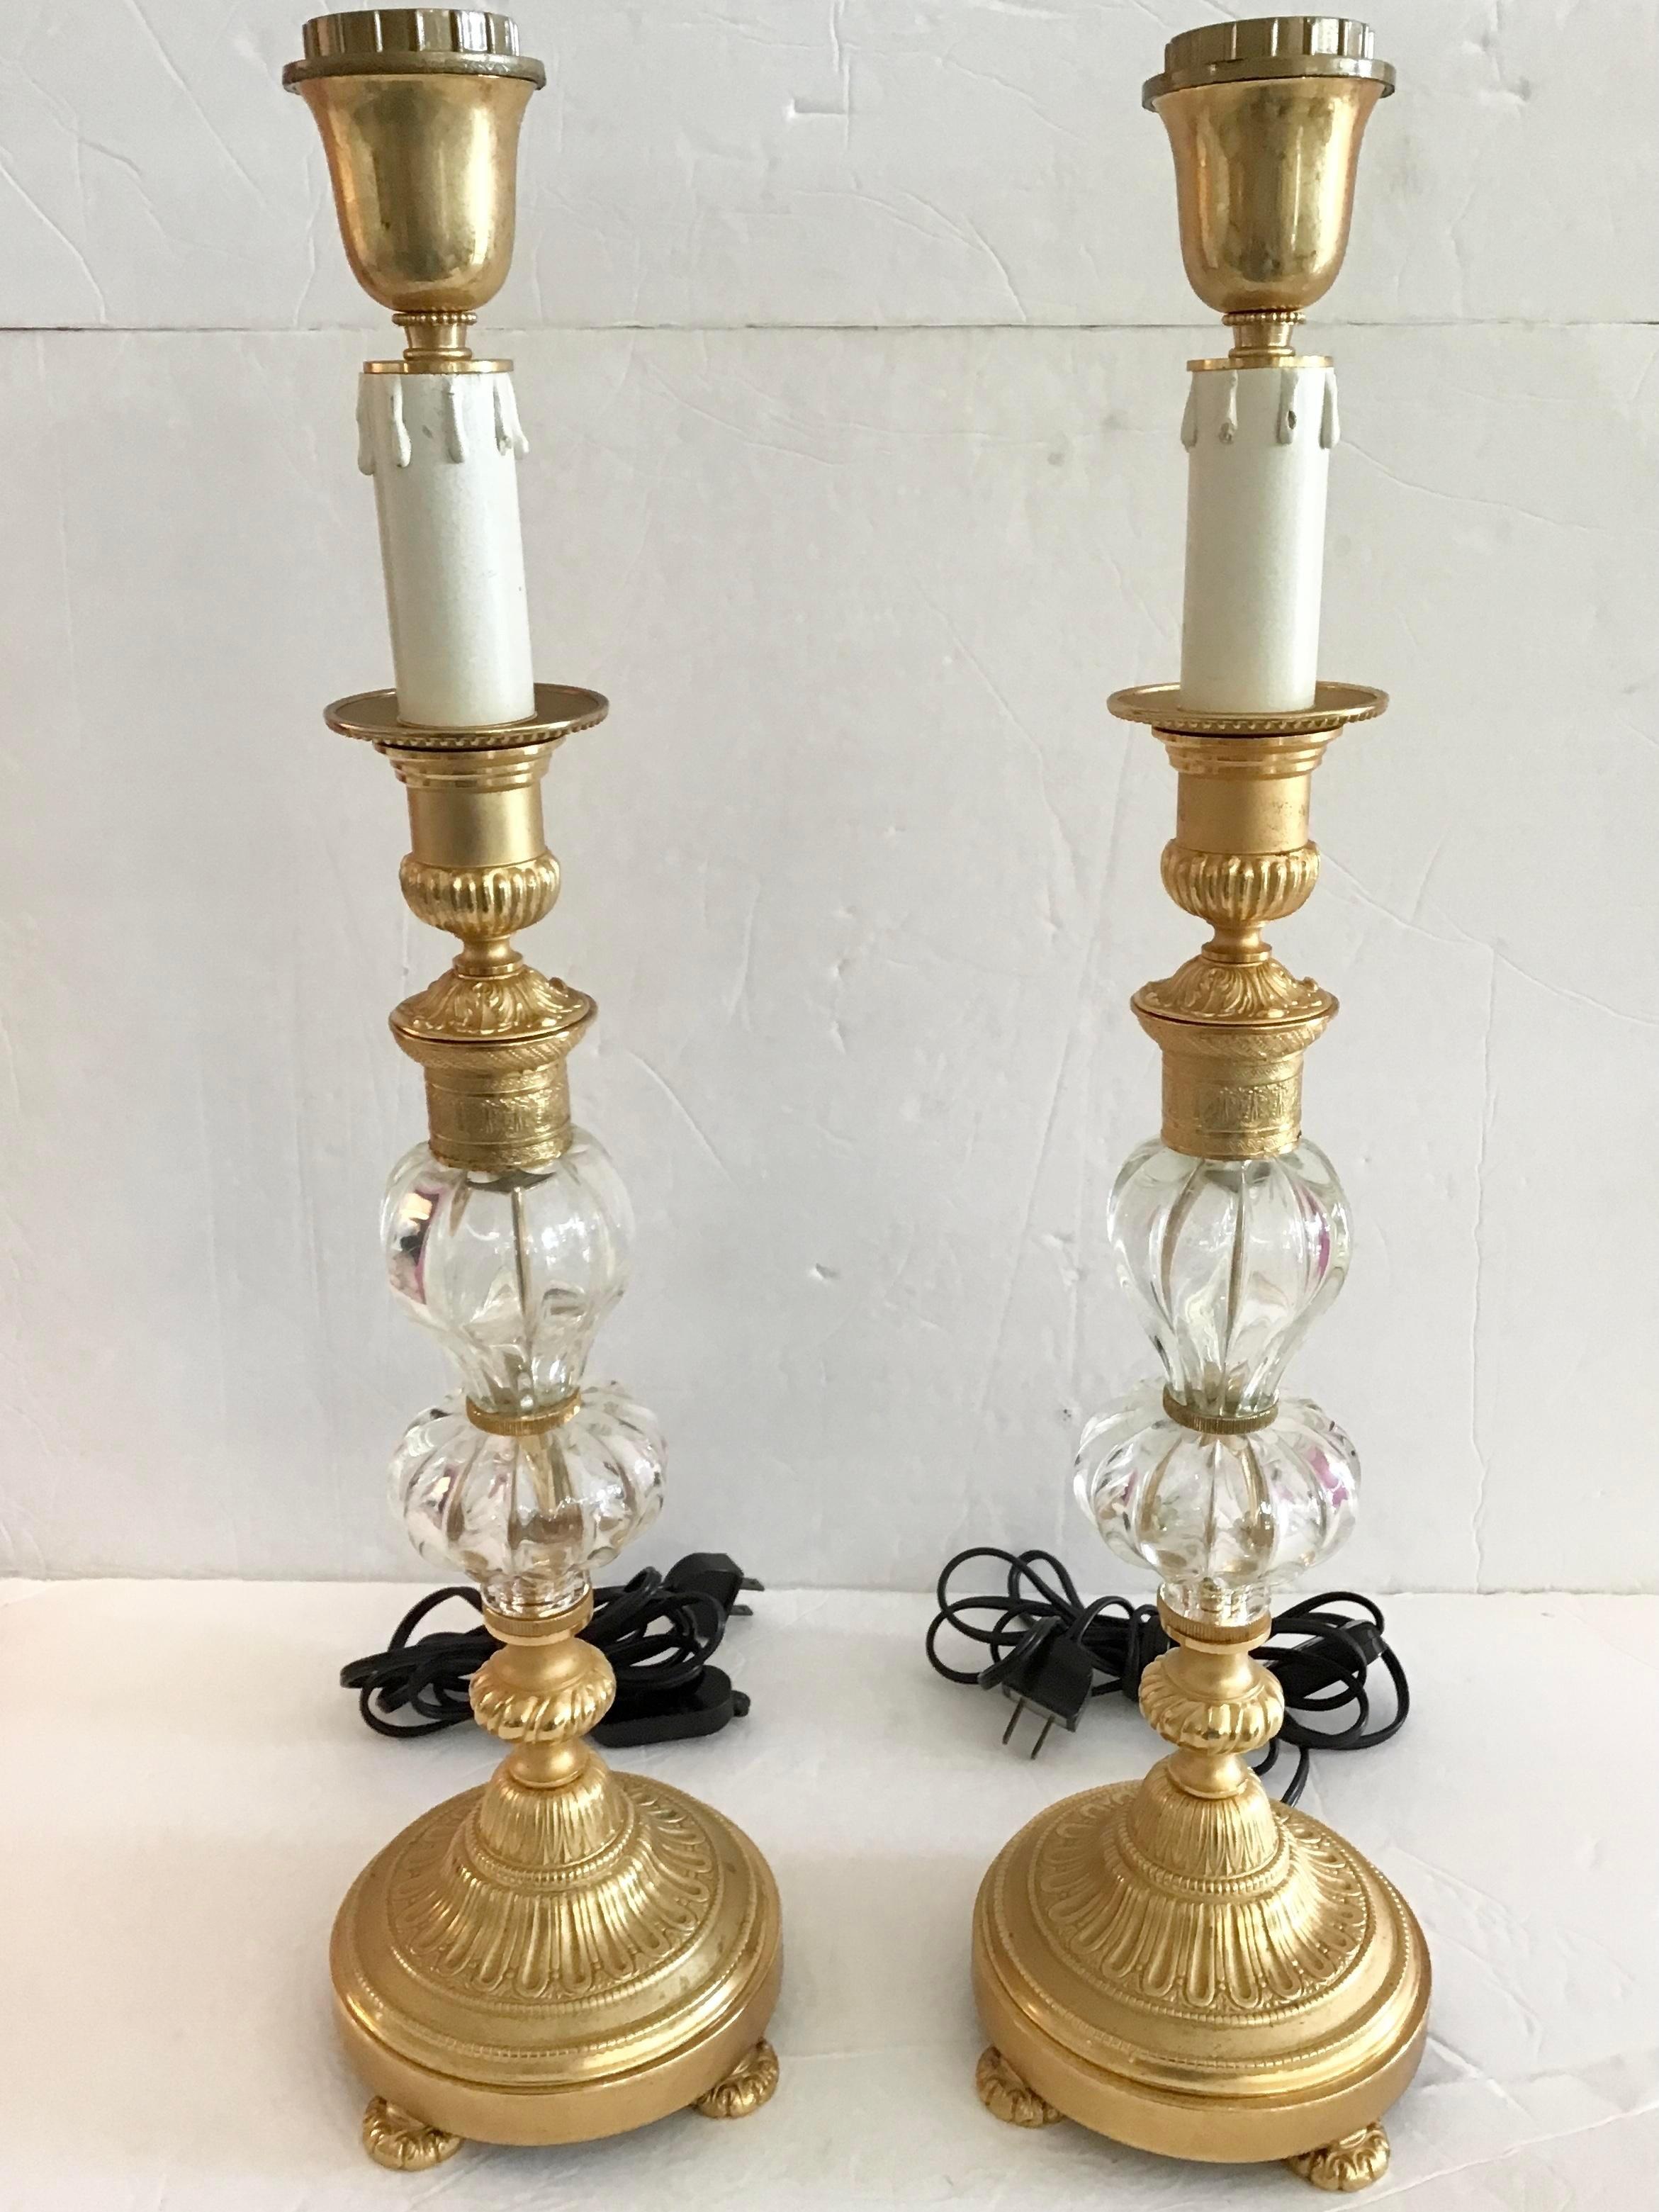 Fabulous pair of Jansen style table lamps with gilt bronze details and clear glass elements. Amazing bronze details with perfect gilt. Really beautiful quality workmanship and pair. Extremely rare to have a pair of this quality. Add some French